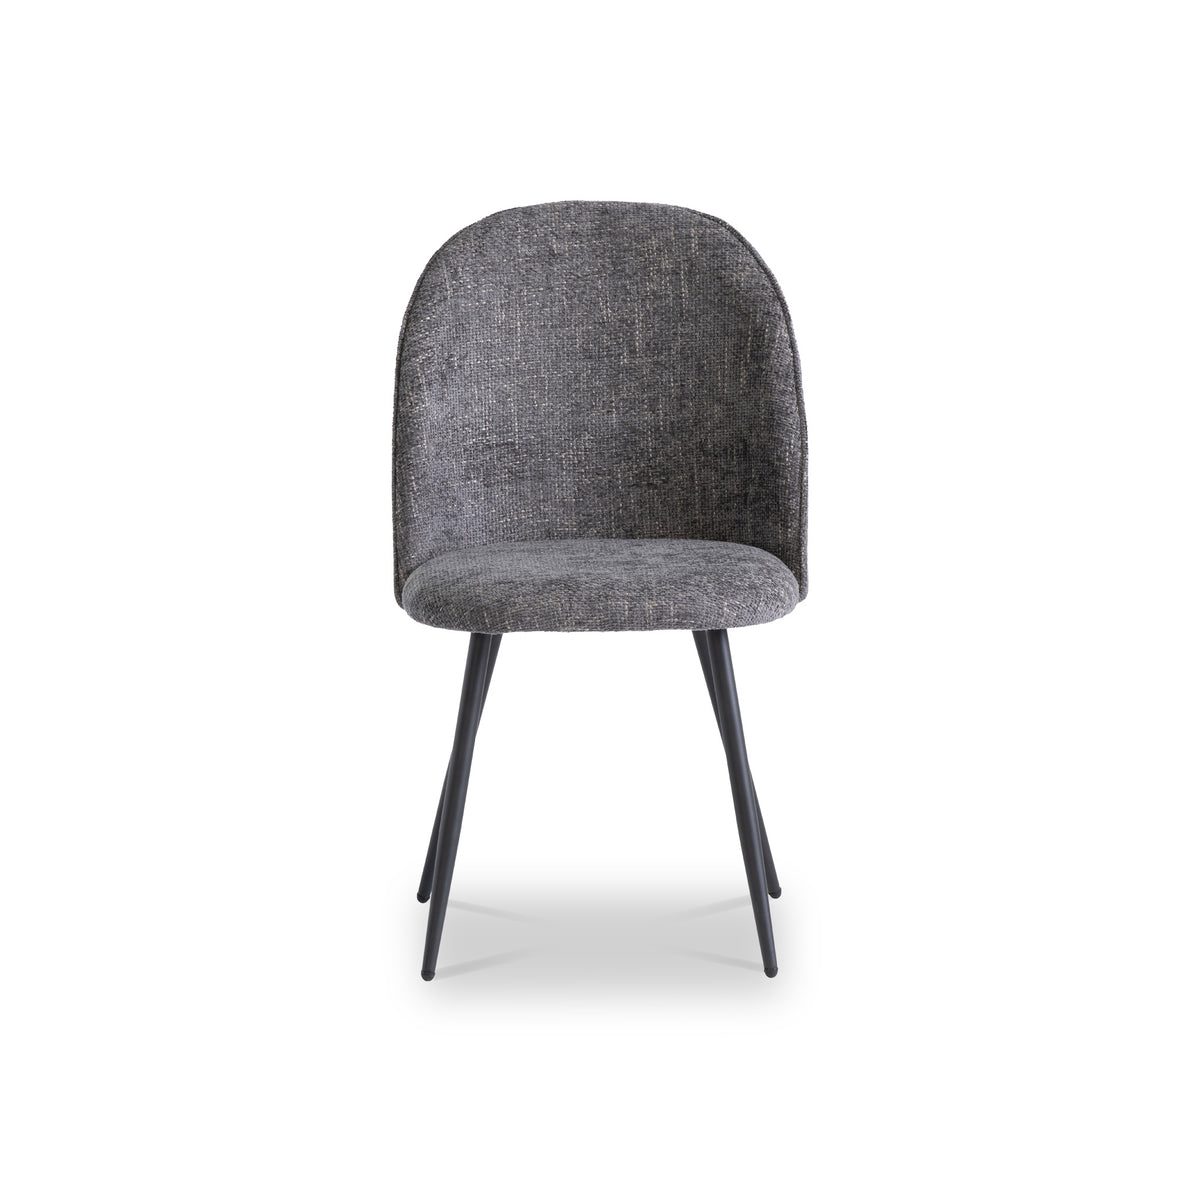 Fern Graphite Dining Chair by Roseland Furniture